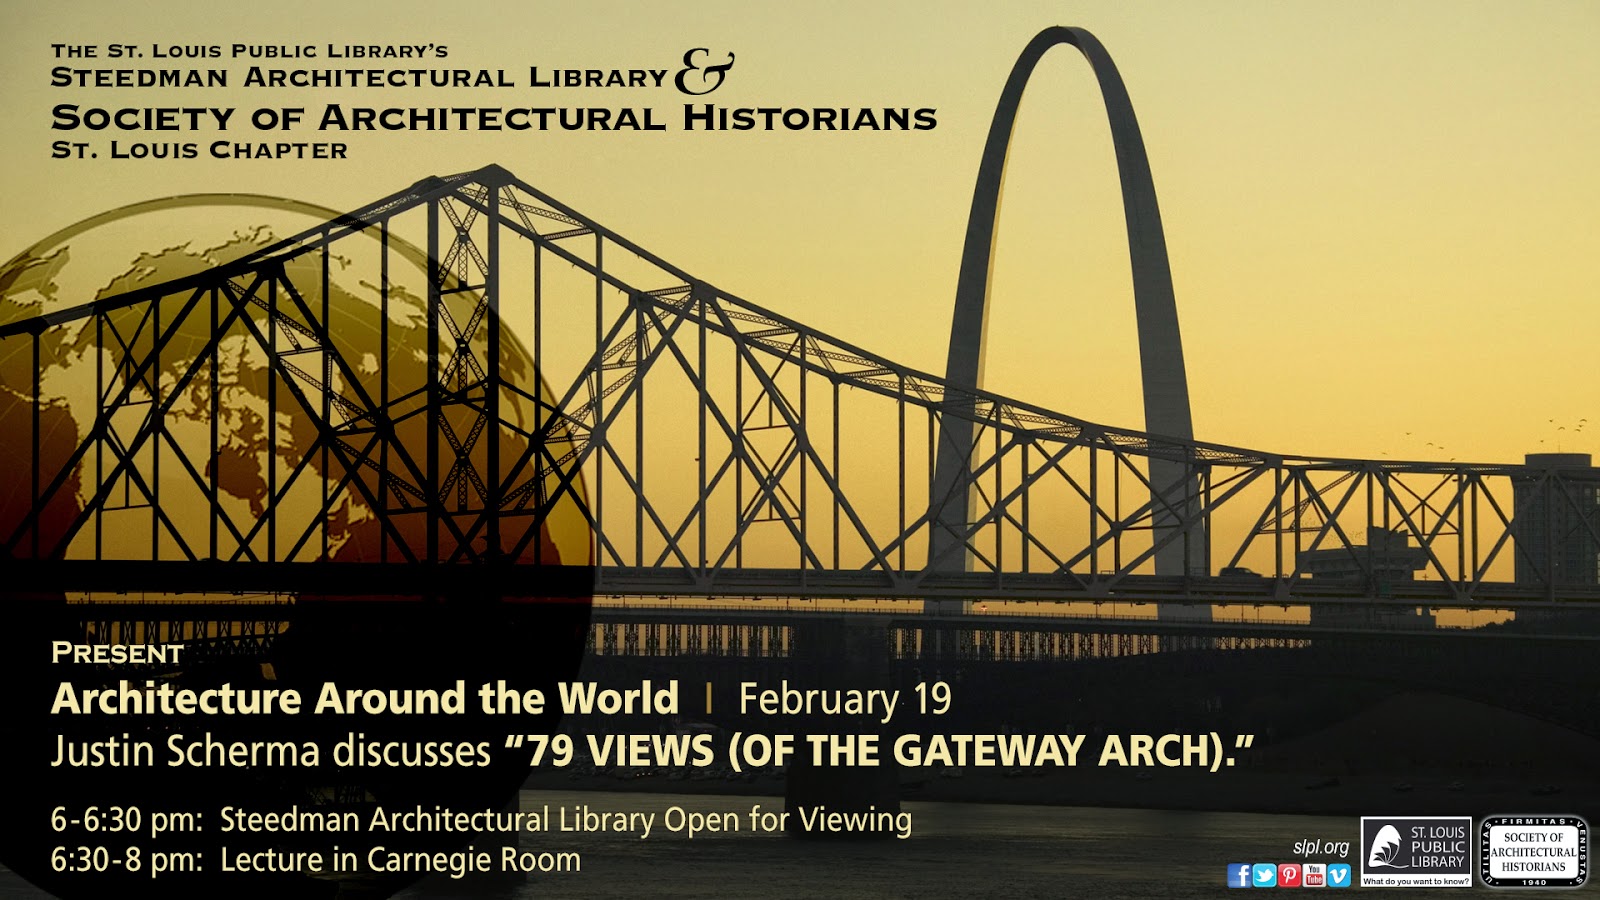 http://steedmanarchitecturallibrary.blogspot.com/2015/02/architectural-lecture-series-starts.html